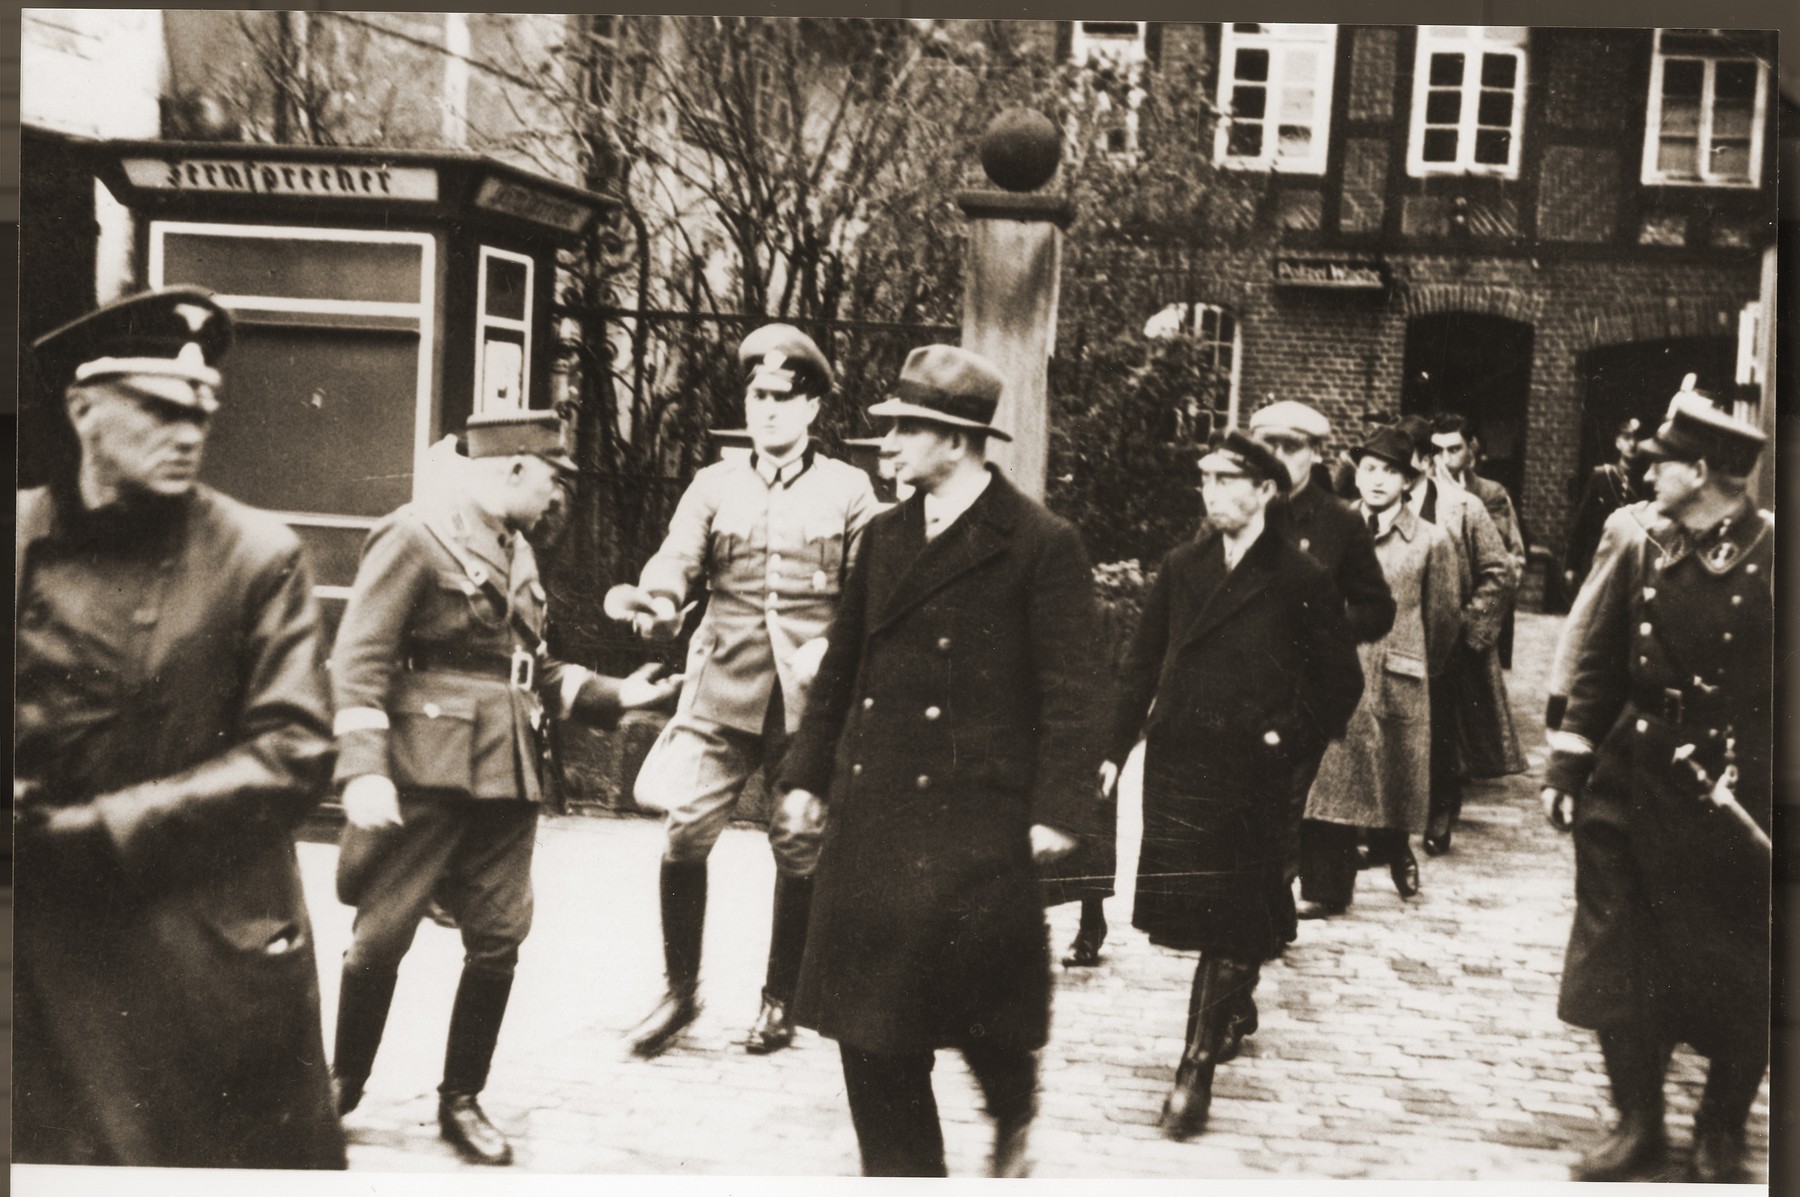 A small group of Jewish men, who have been rounded-up for arrest in the days after Kristallnacht, file out of the police station in Stadthagen, escorted by German police and SA members.